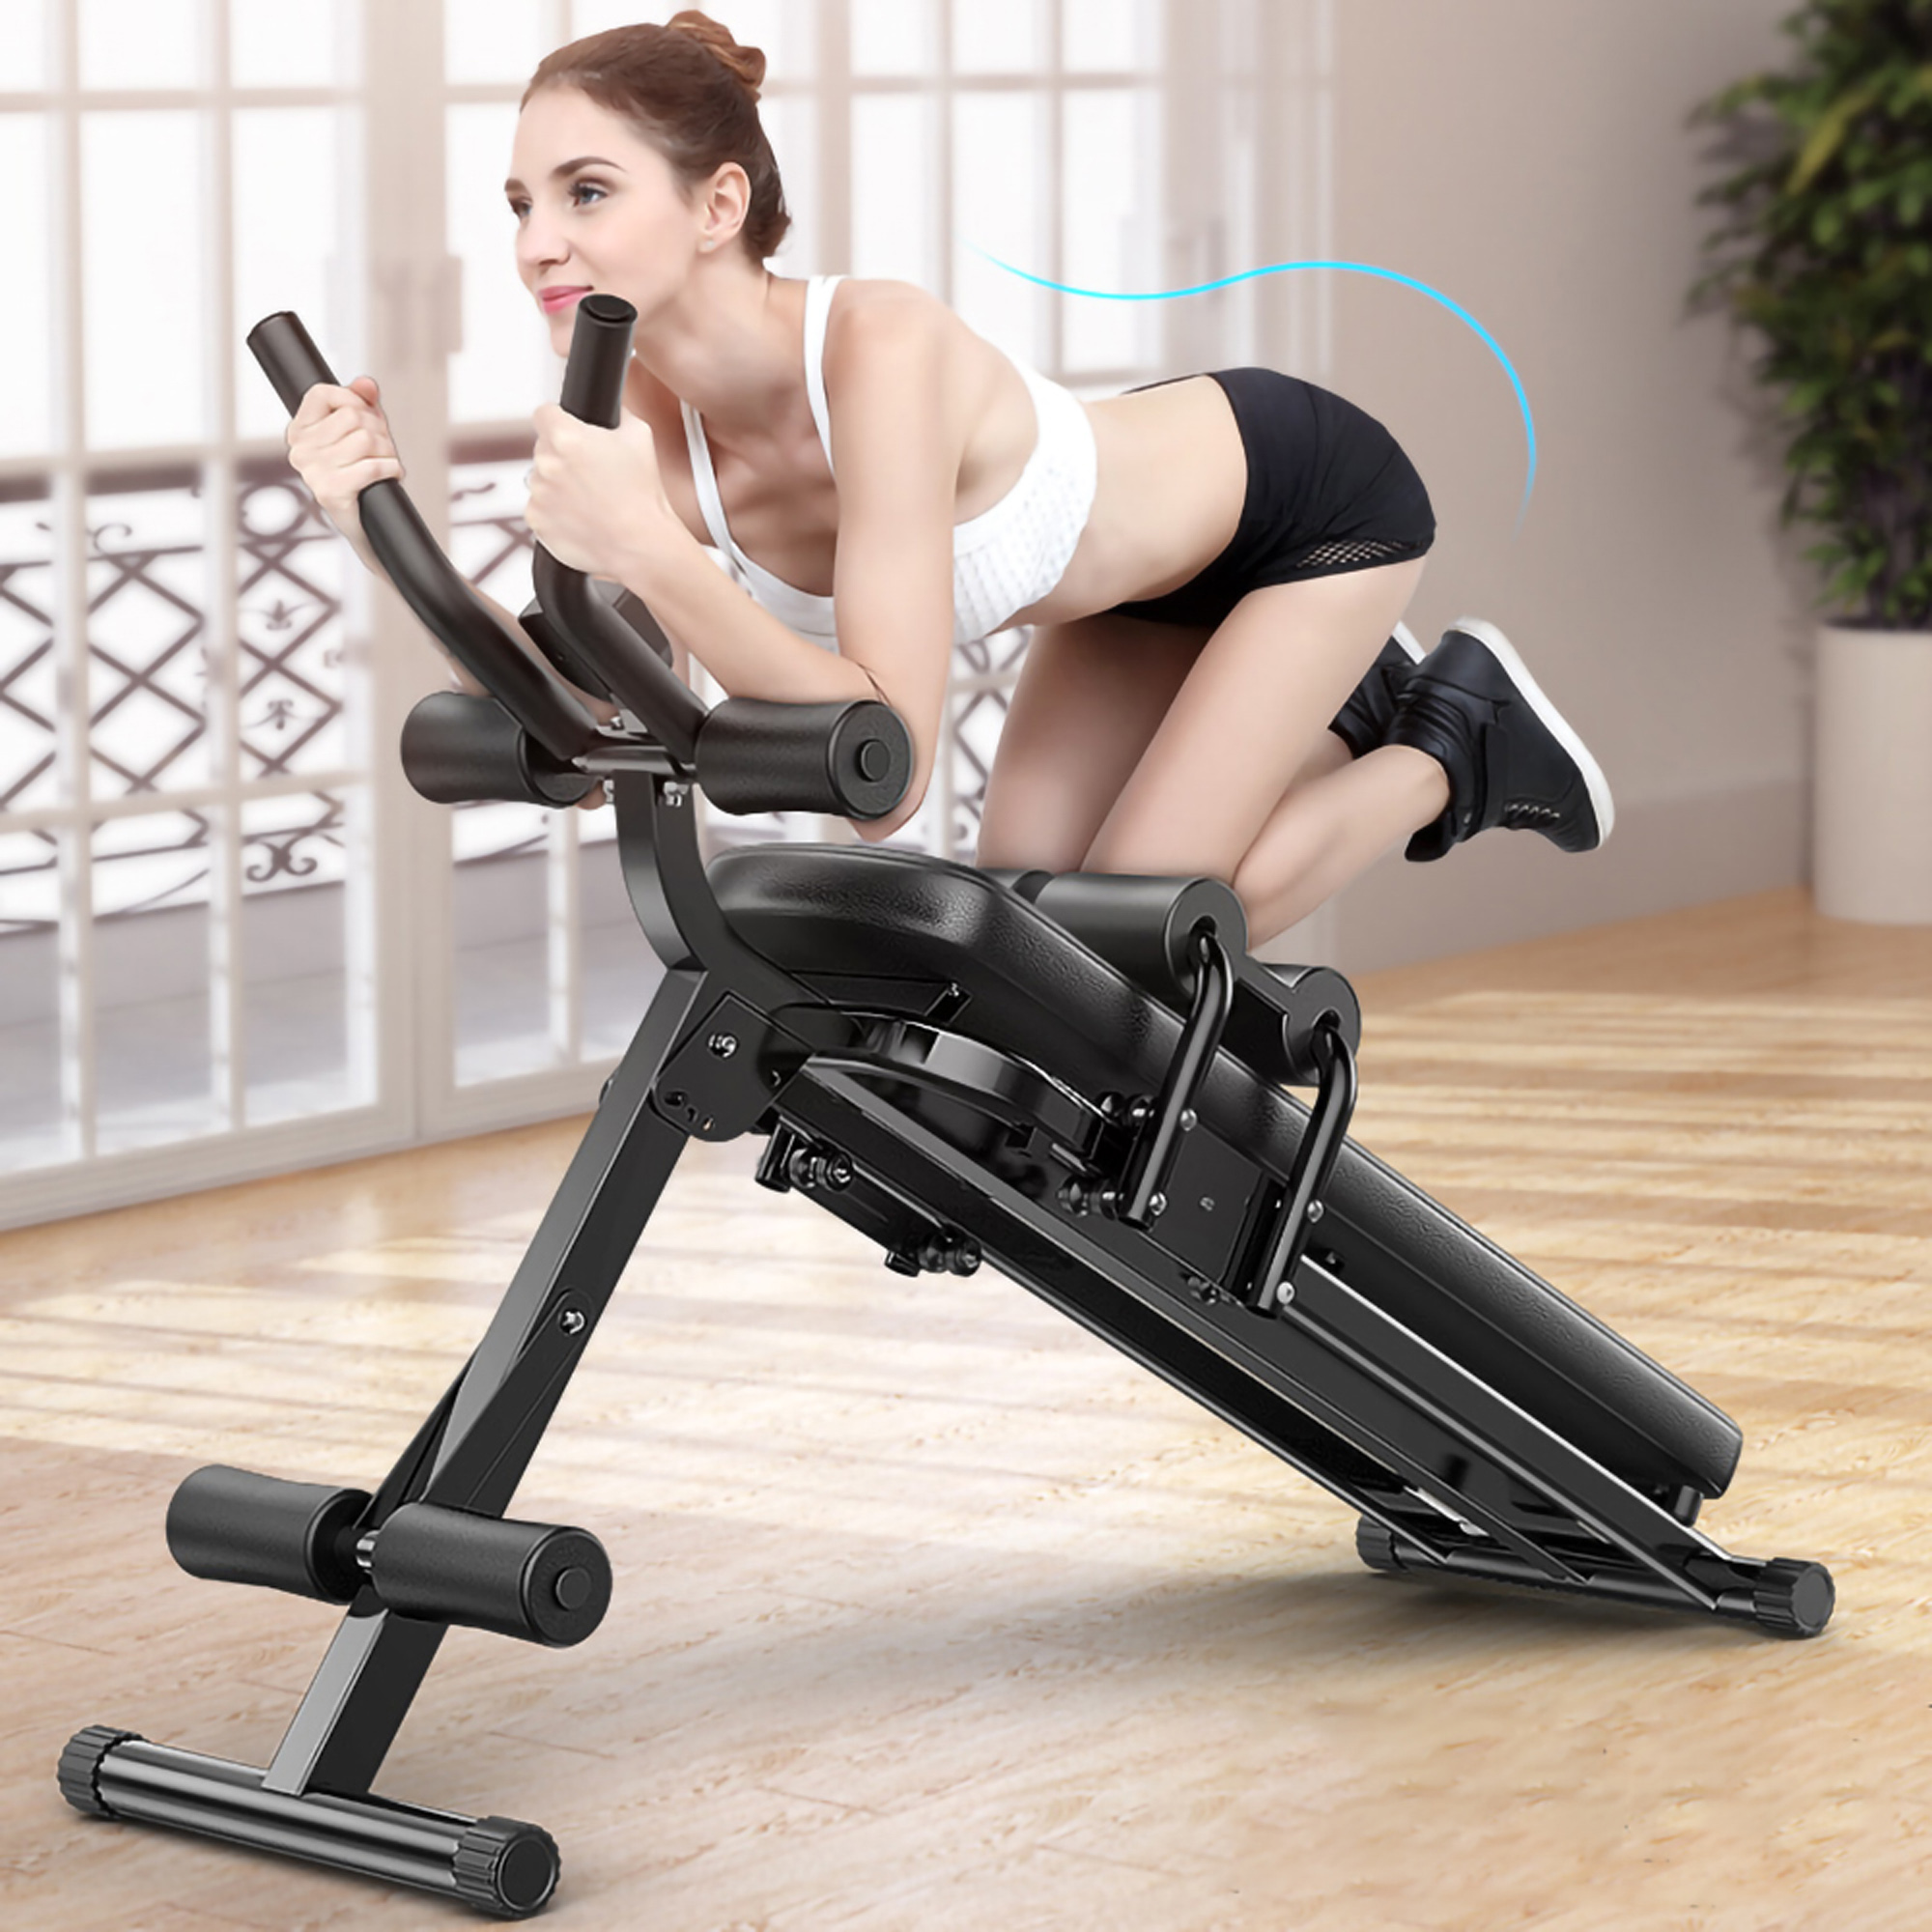 SAYFUT Roller Coaster Abdominal Machine Waist Fitness Equipment Abdomen Exercise Machine with LCD Display, for Home Gym Muscle Build Fitness Workout - image 1 of 7